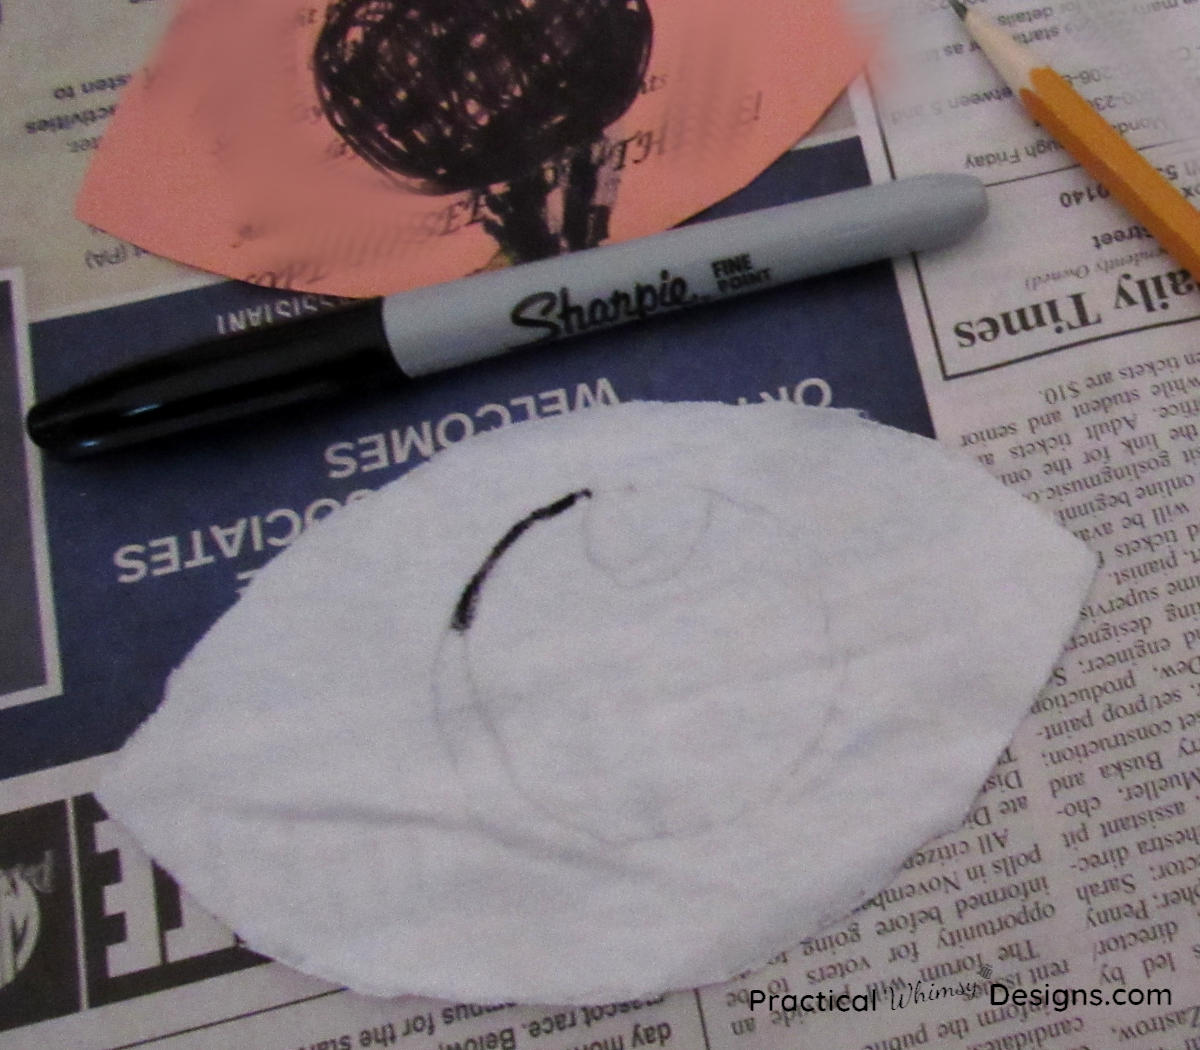 drawing pupil on fabric eye with sharpie for flying purple people eater costume